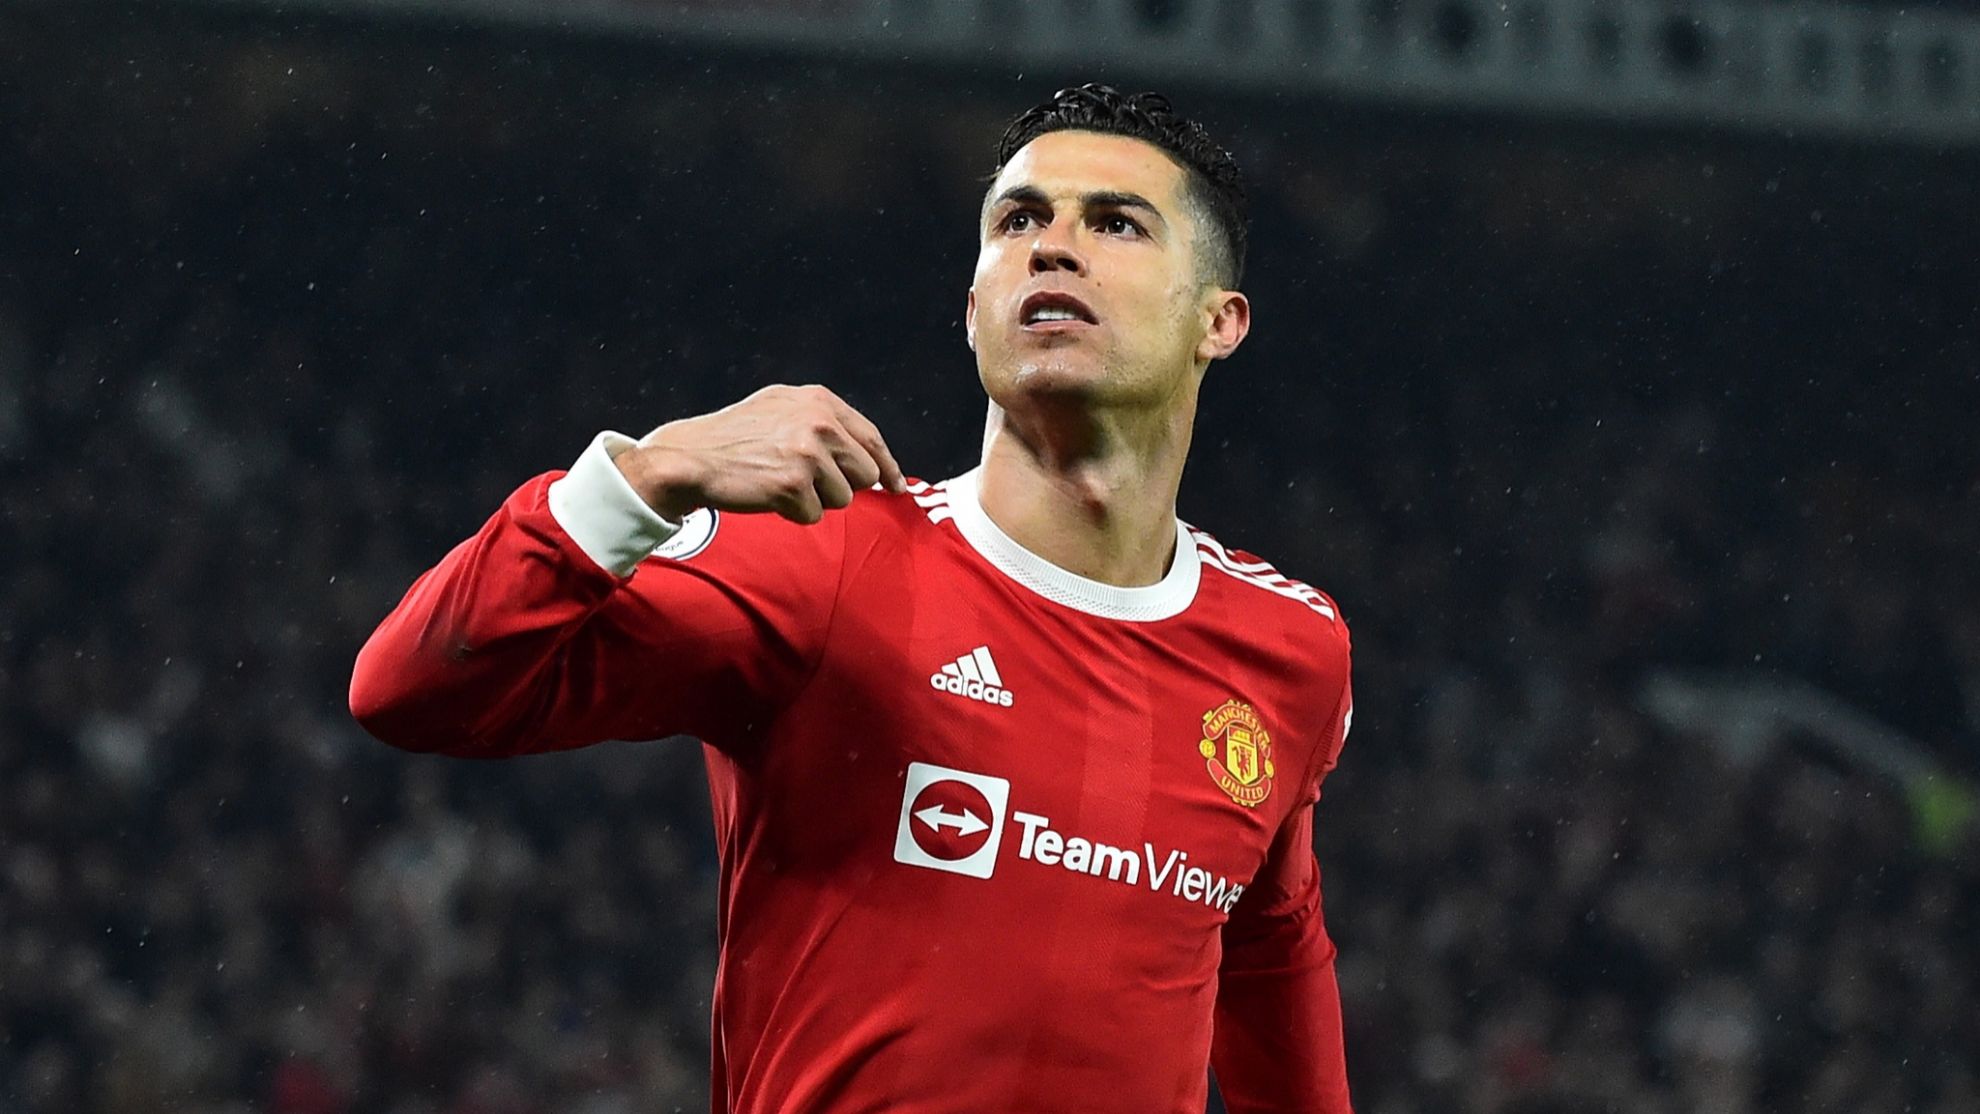 Man Utd News: Cristiano Ronaldo warning to Manchester United after Ten Hag appointment - Marca